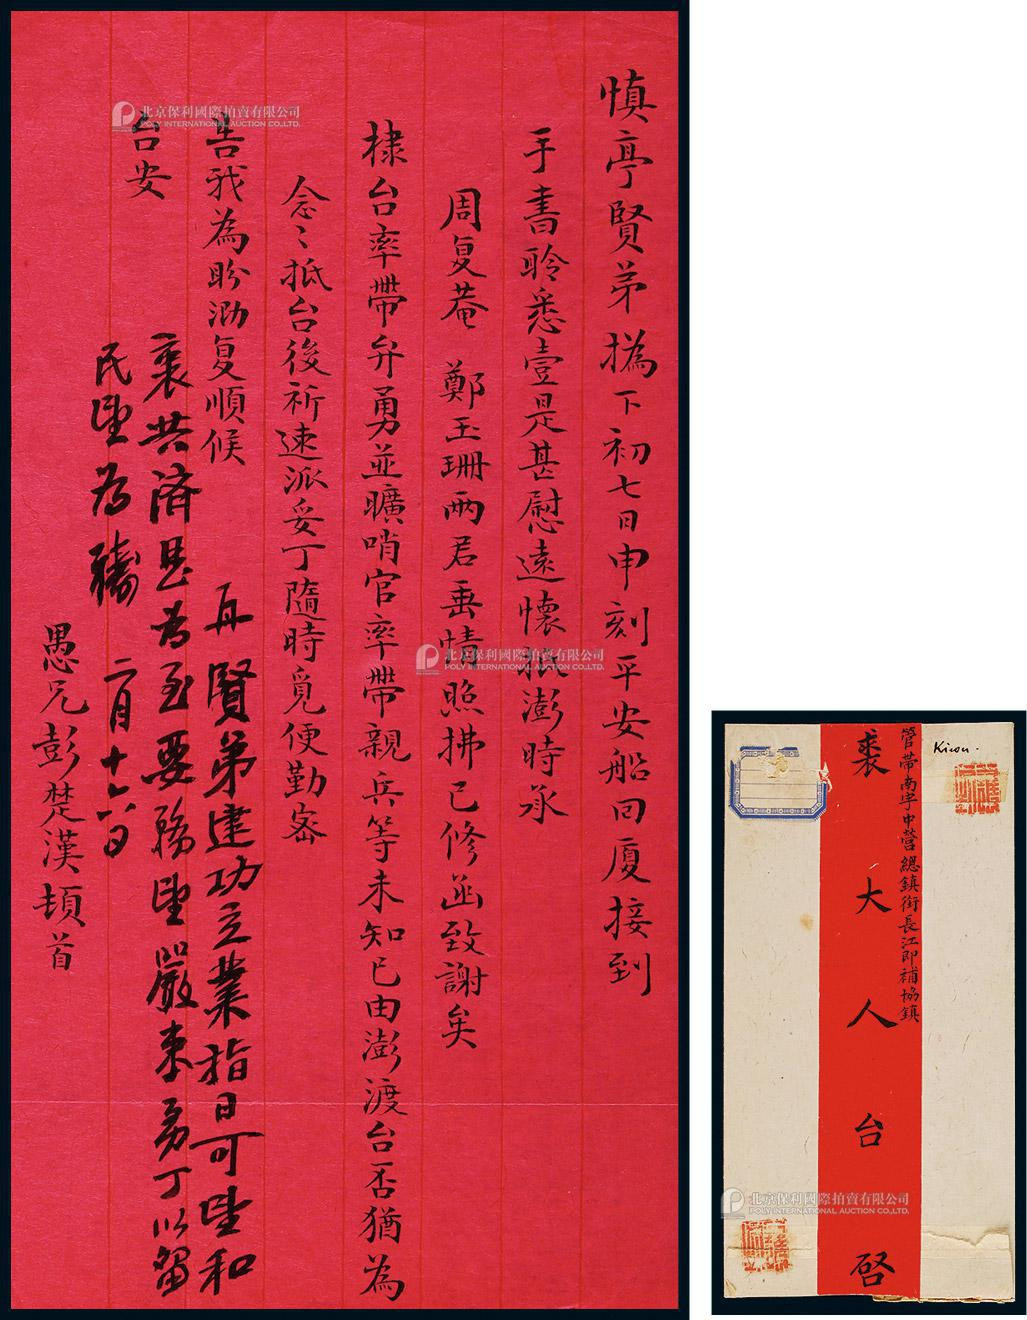 One letter of one page by Peng Chuhan, with original cover